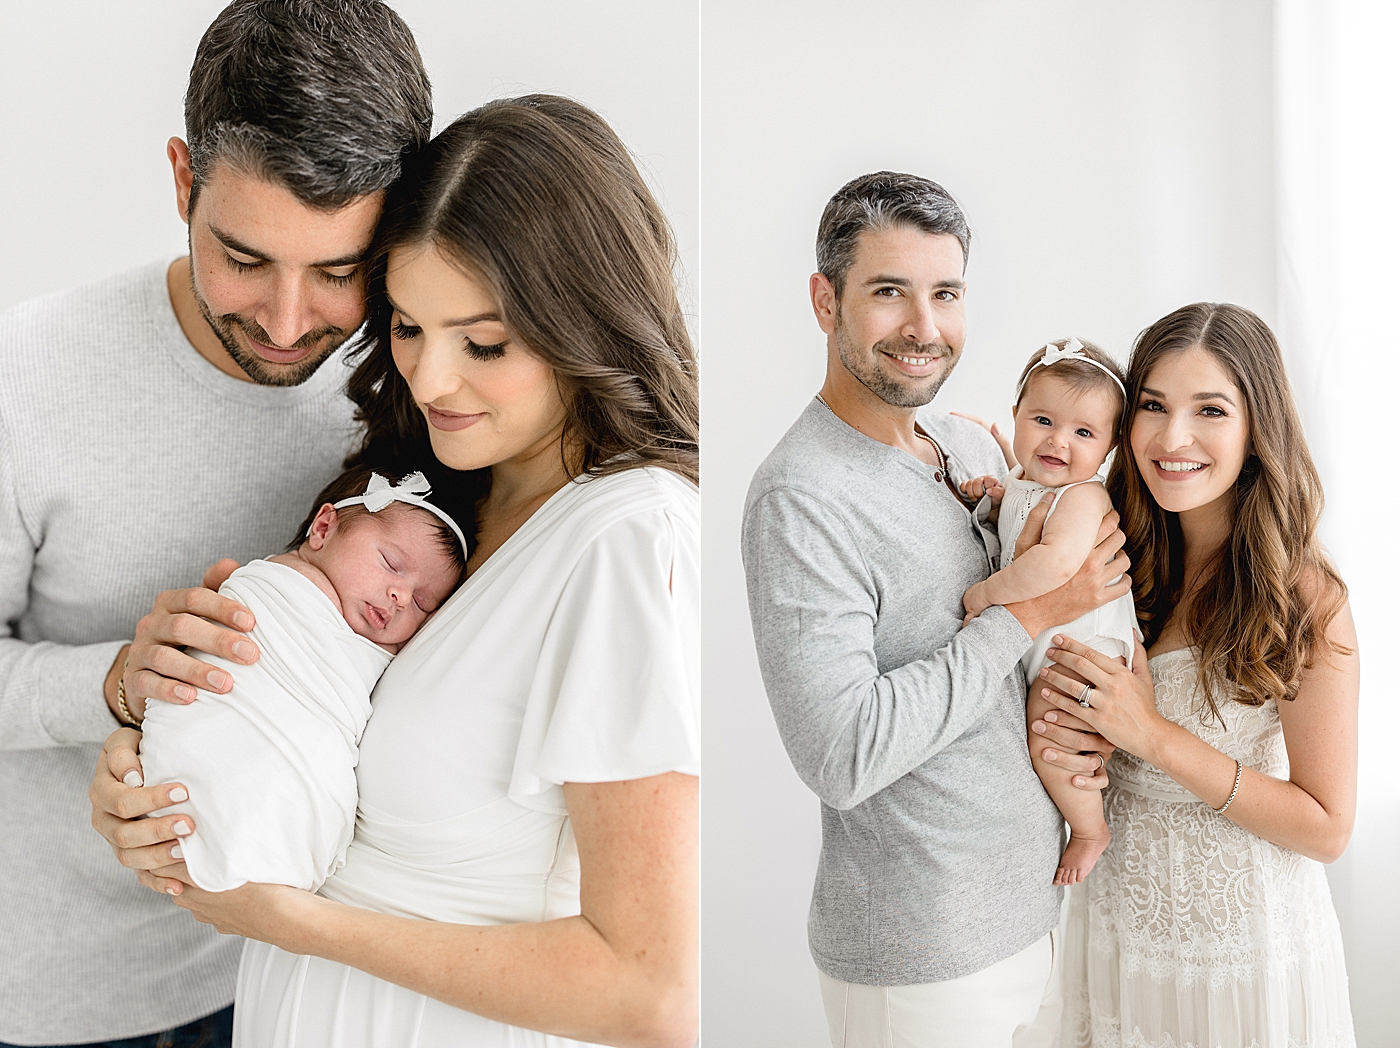 Documenting your baby's milestones - newborn and six months. Photos by Brittany Elise Photography.